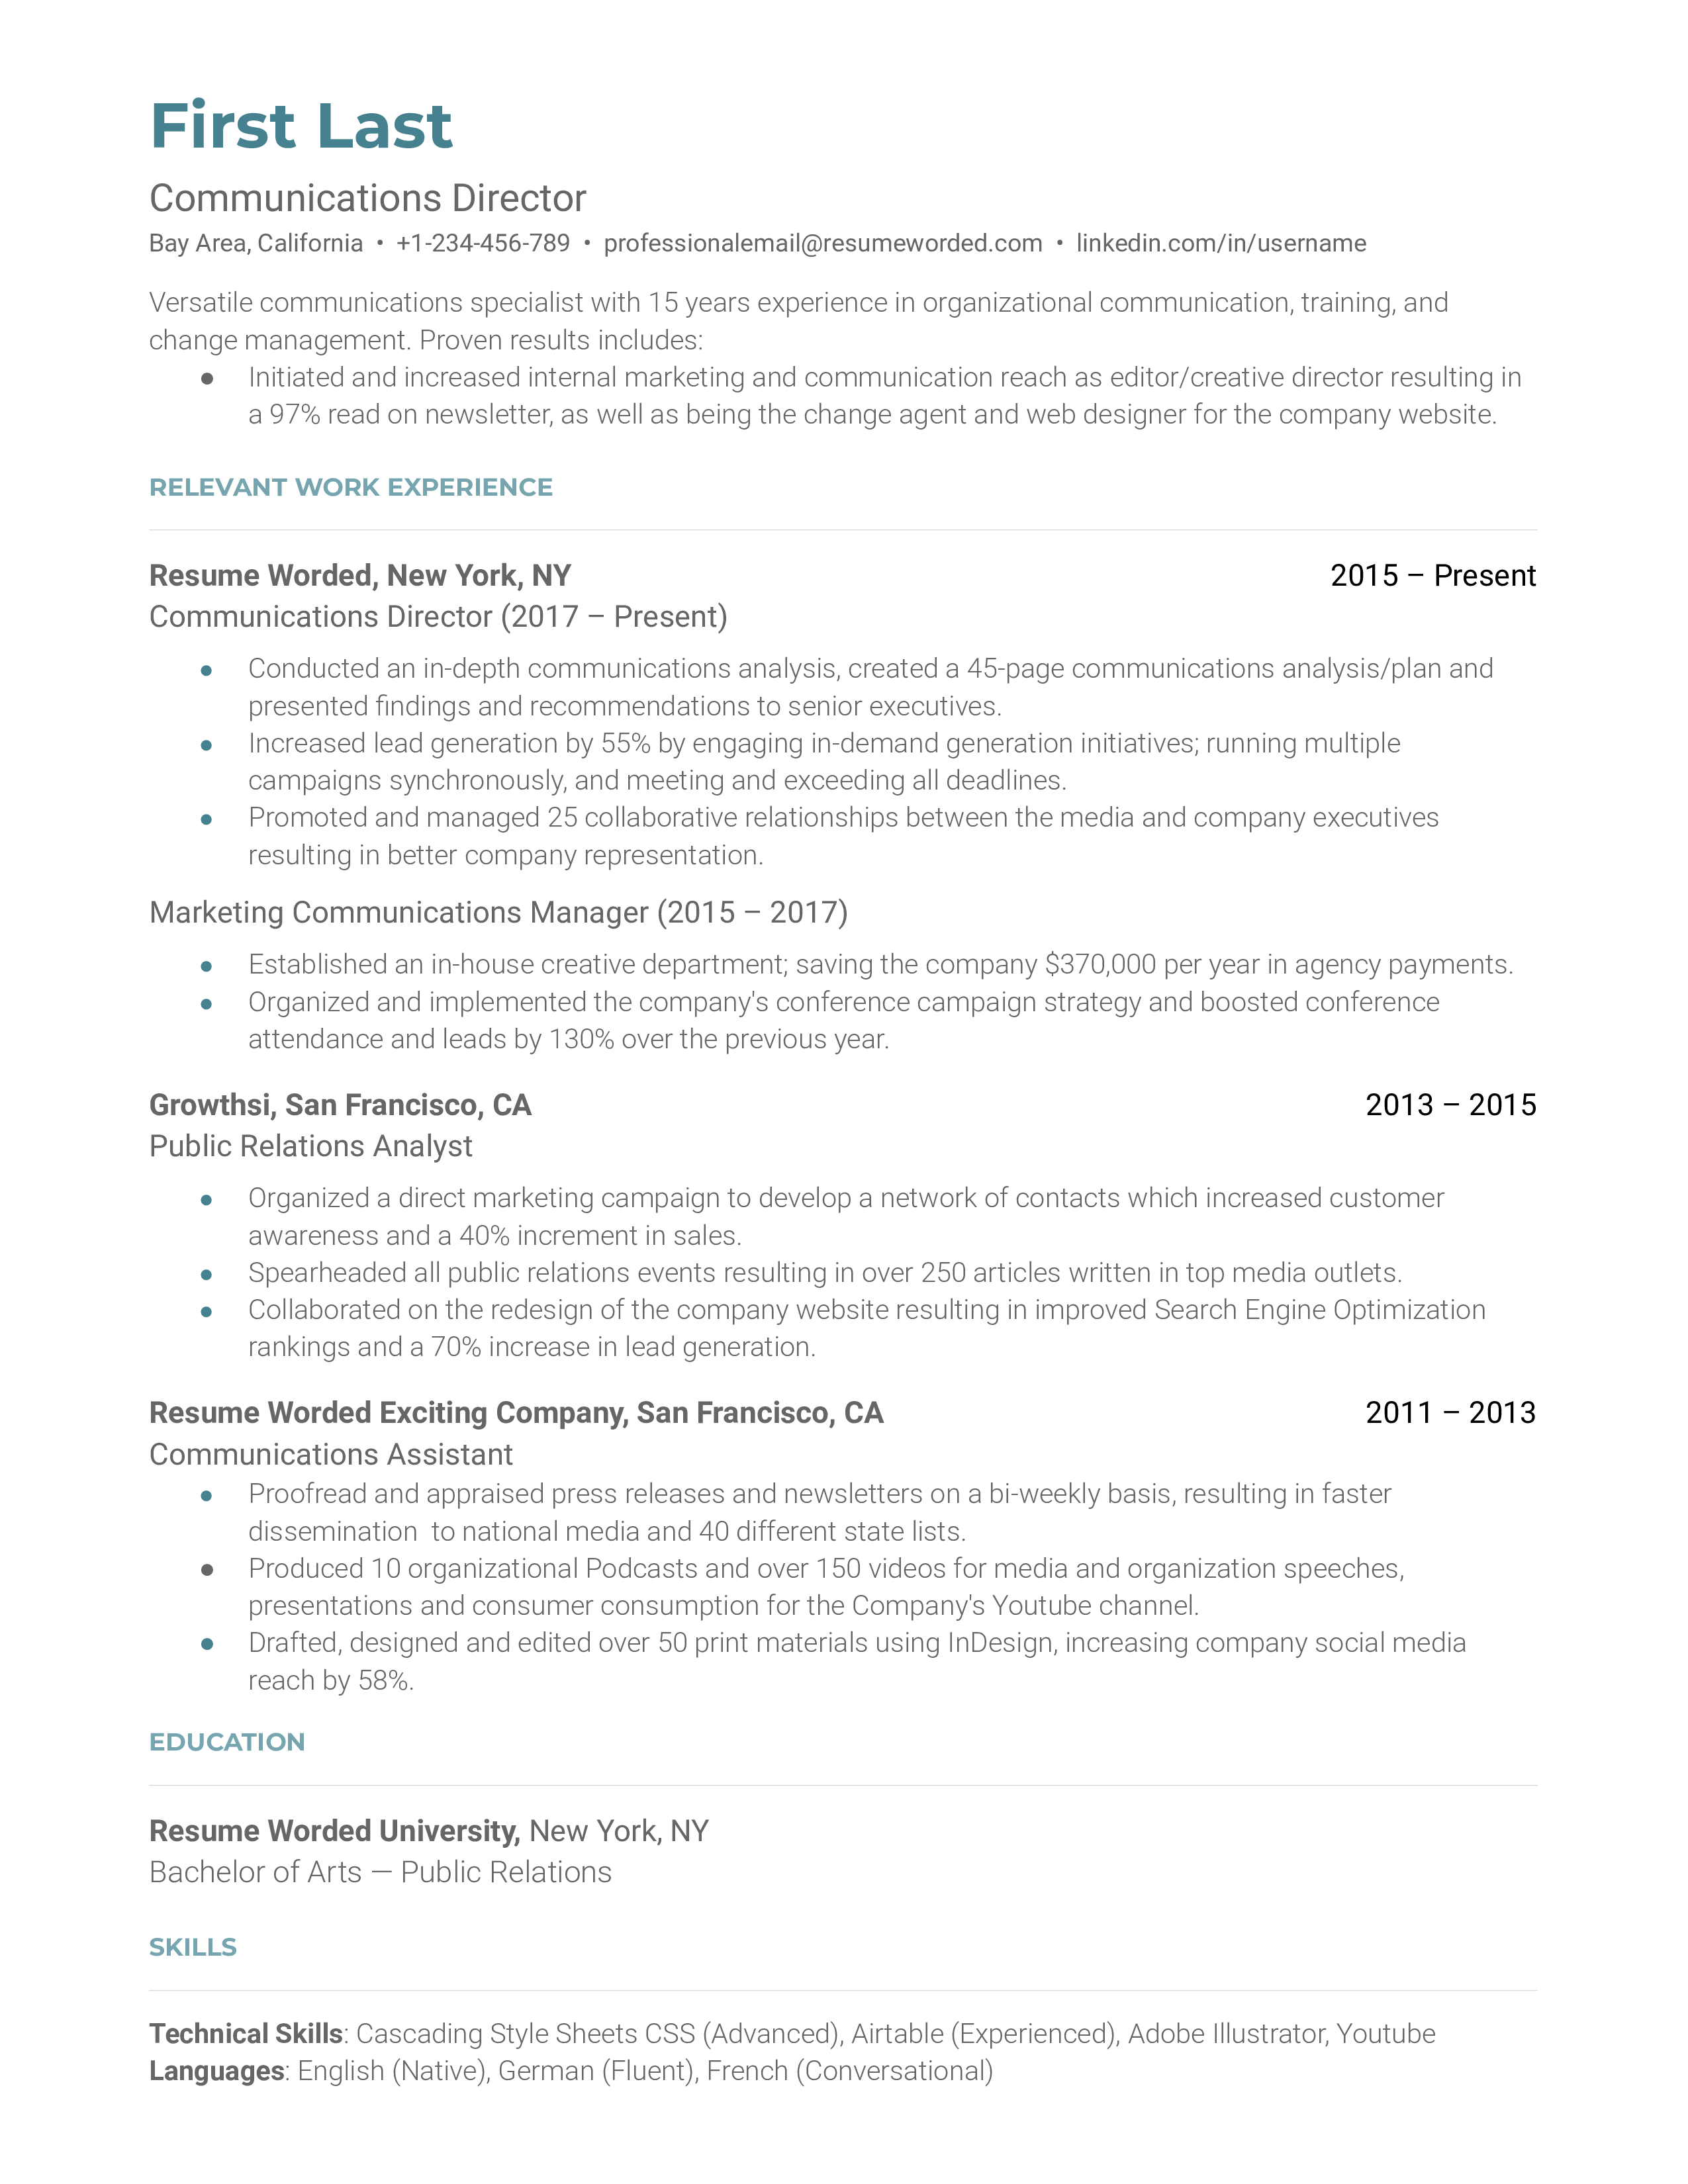 A resume for a director of communications that highlights the experience to lead an organization’s communications strategy